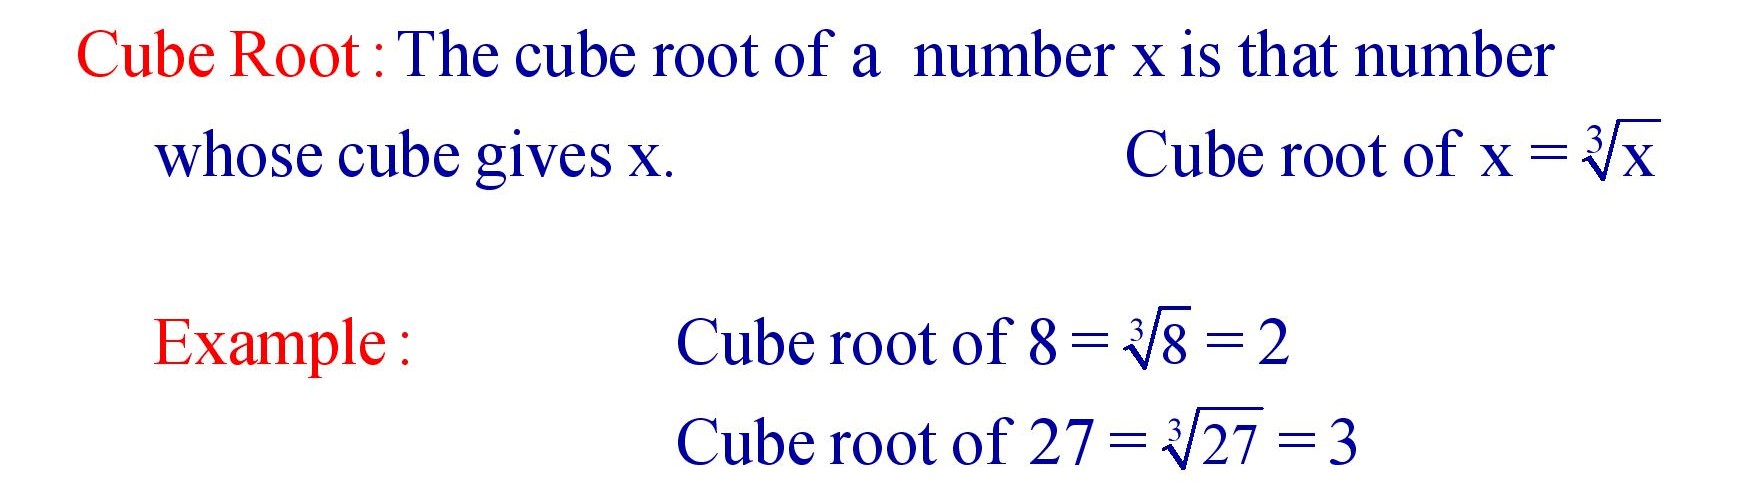 Cube Root